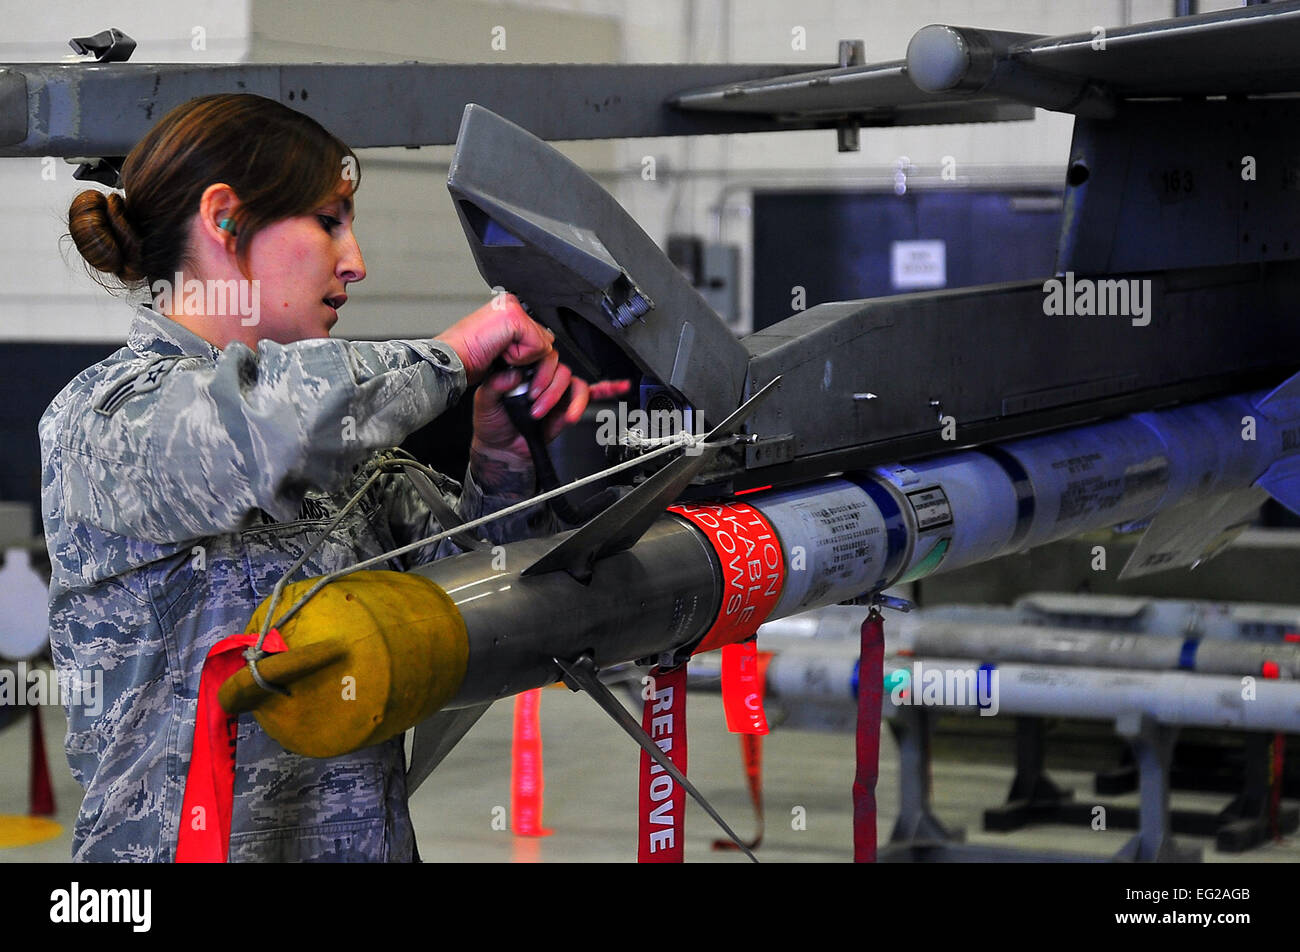 Senior Airman Faith Richards secures an AIM-9 Sidewinder missile onto an F-16 Fighting Falcon during a load crew team competition Jan. 25, 2013, at Osan Air Base, South Korea. Richards is a 36th Aircraft Maintenance Unit weapons loader. Staff Sgt. Emerson Nunez Stock Photo